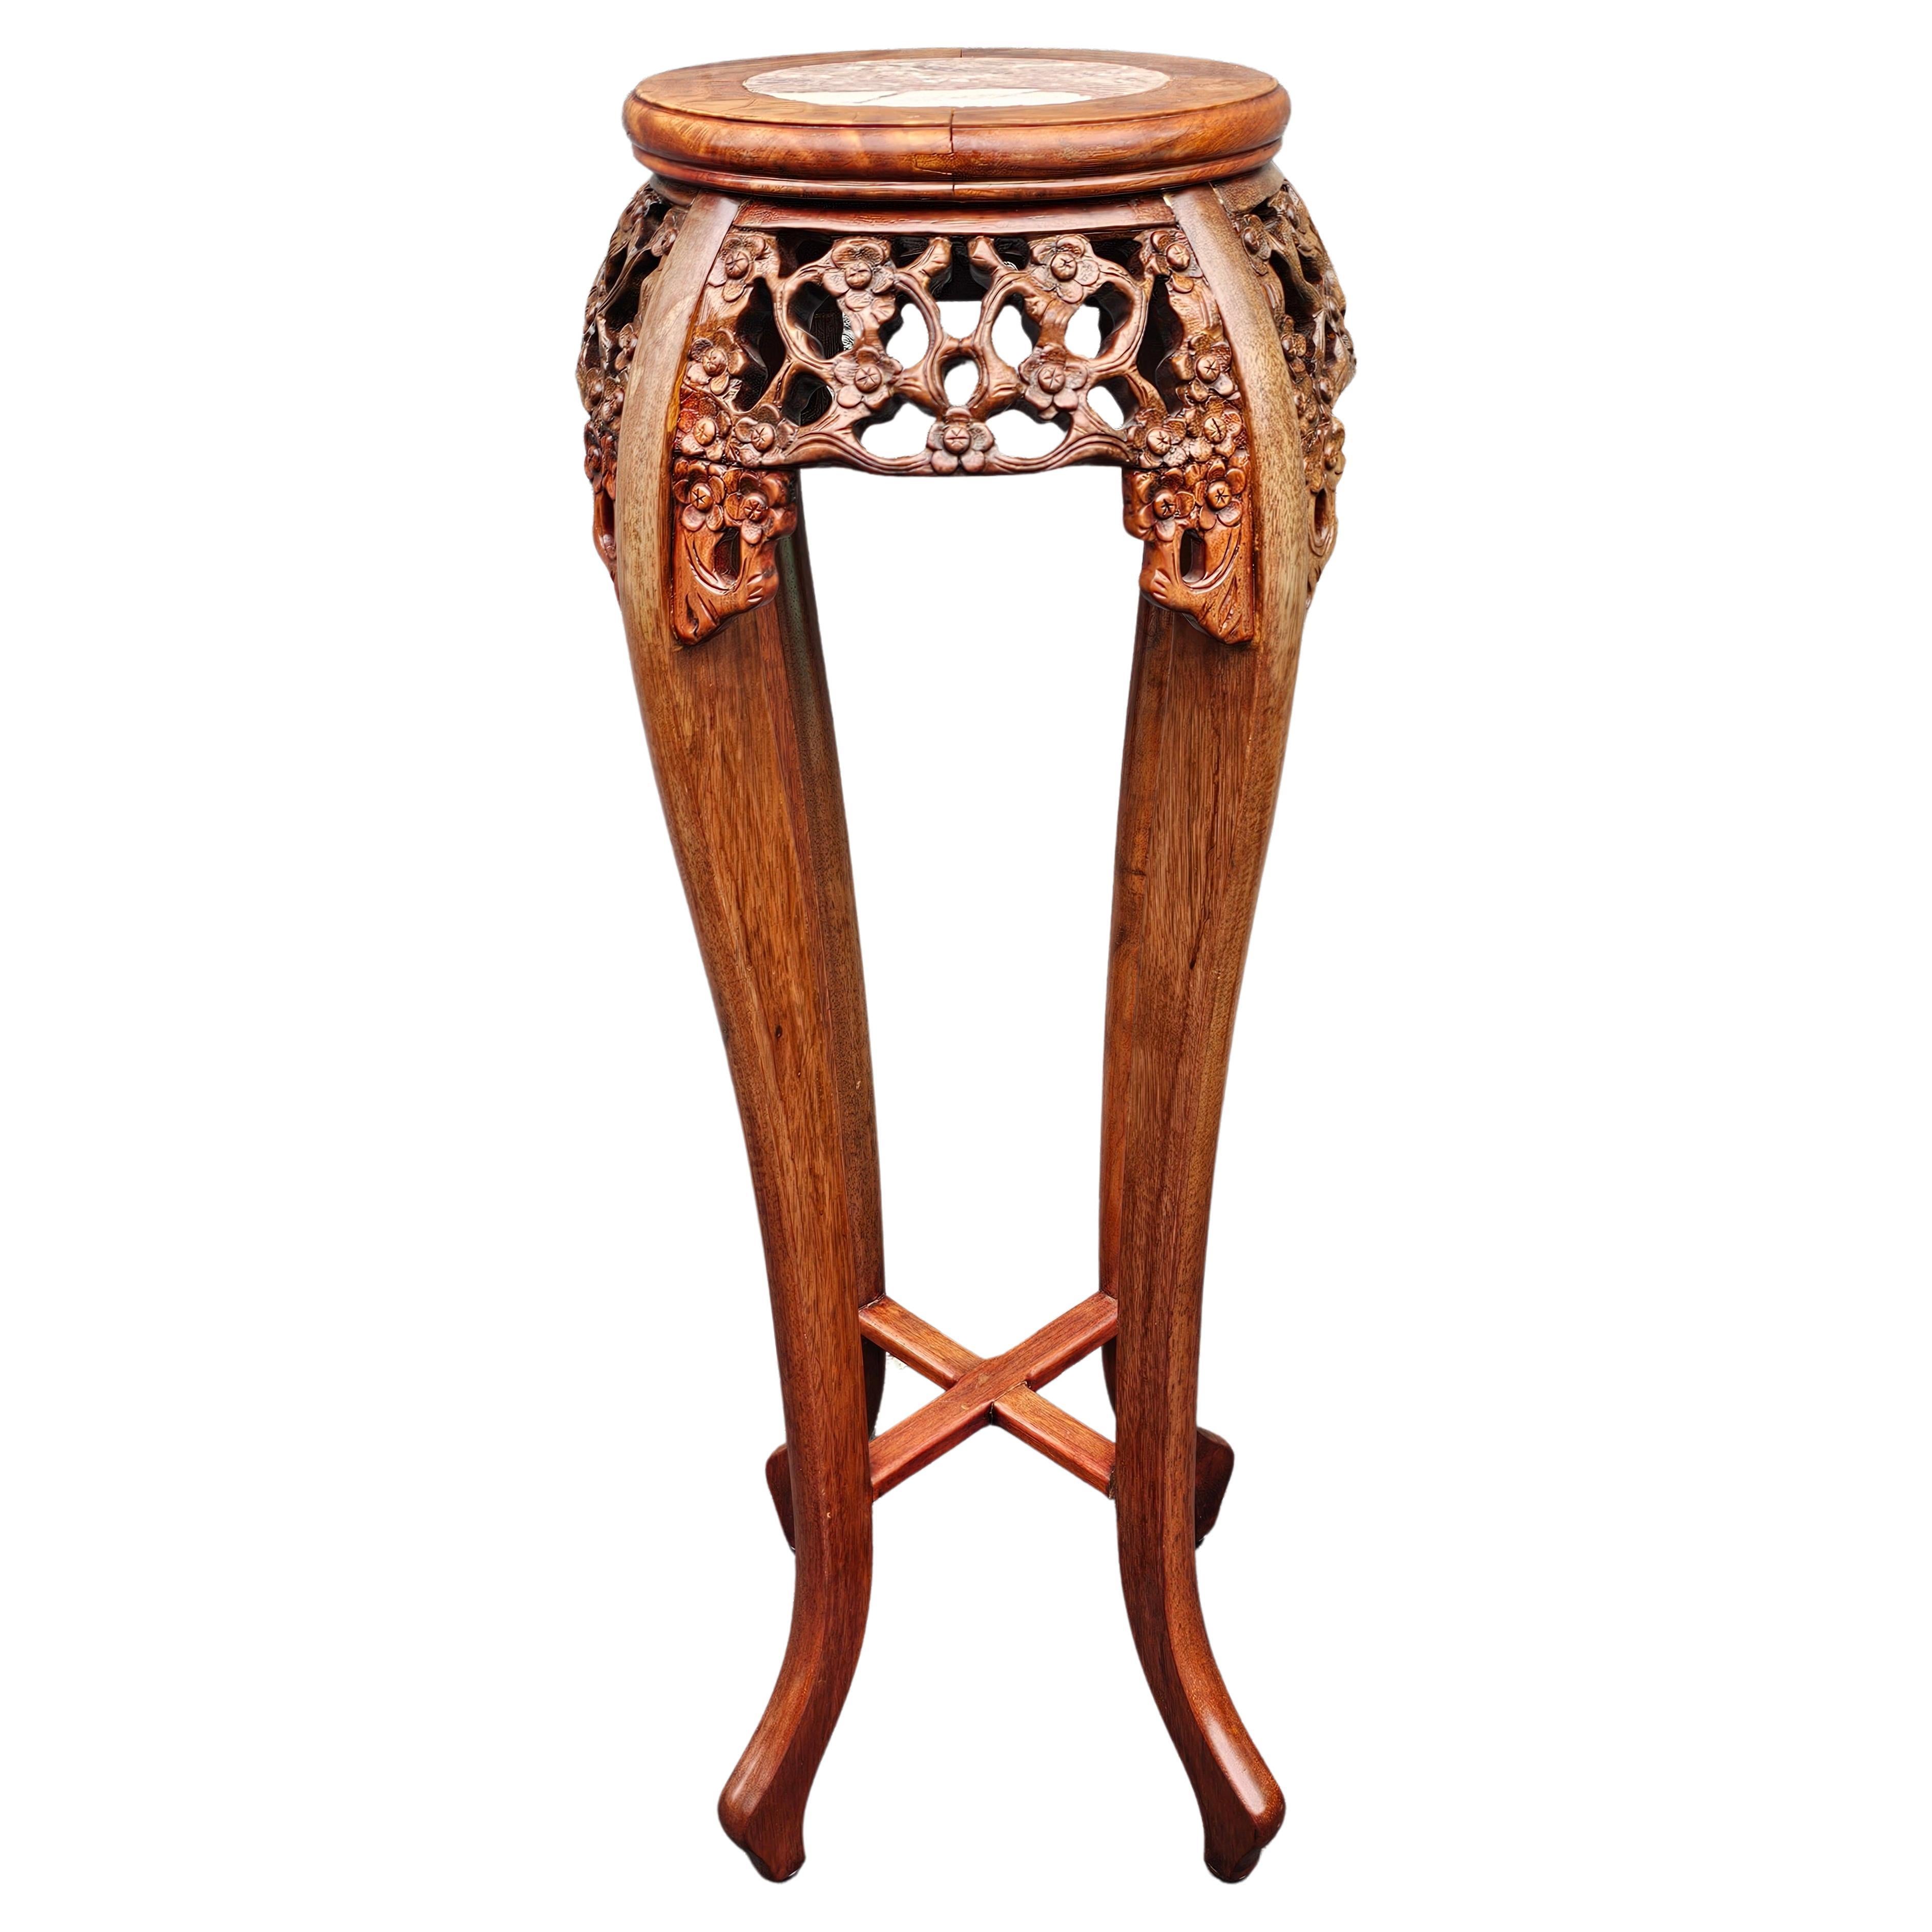 A mid century Chinese Carved Hardwood And Marble Inset Tabourette. Stands 36.5